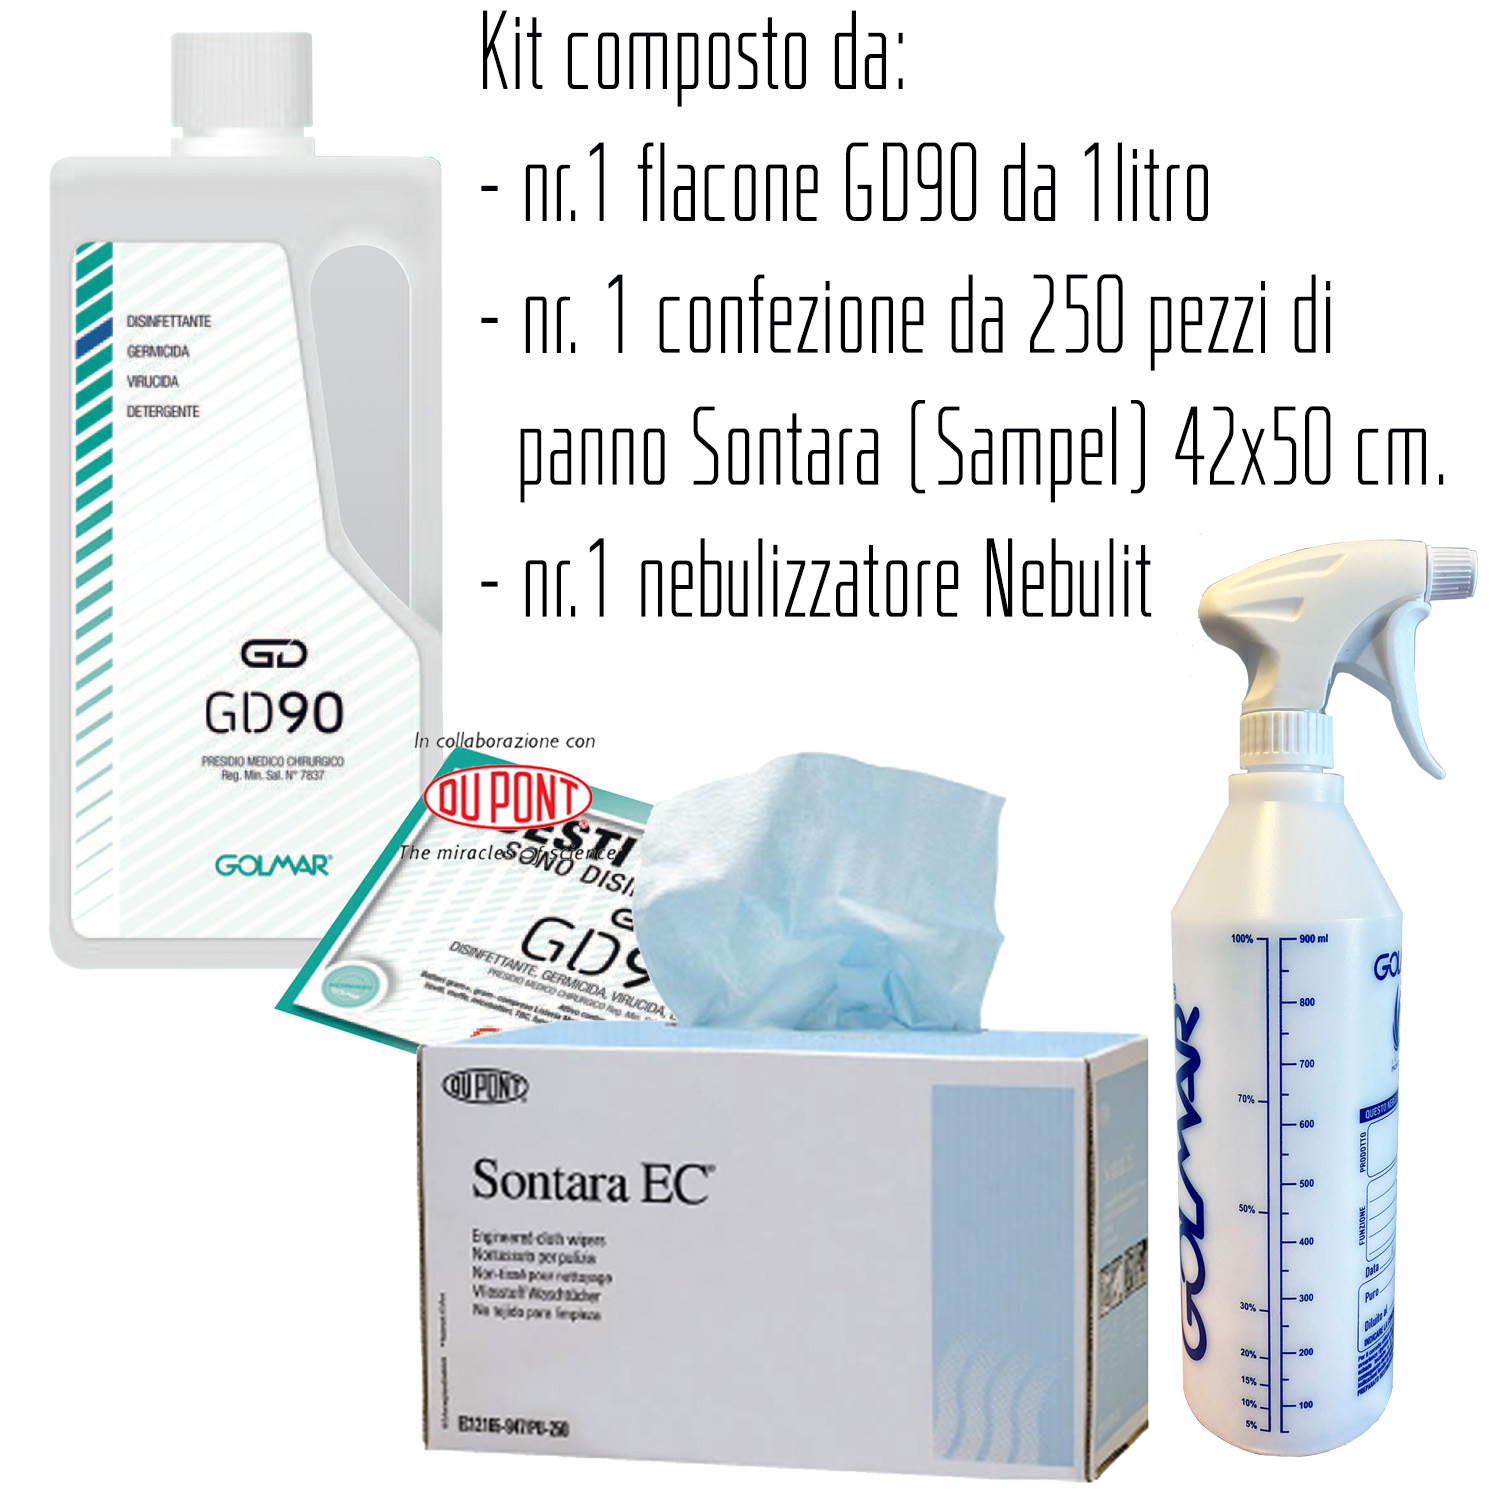 Kit including: n° 1 bottle GD90 liquid 1 liter - Biocide - broad-spectrum professional disinfectant (effective against viruses including Coronavirus, bacteria, yeasts and molds), n° 1 trigger bottle NEBULIT (graduated nebulizer 1 lt – for dosing liquid GD90 diluted to 5% with water), n° 1 package with 250 pcs. SONTARA EC® - High-performance non-woven fabric cloth 42x50 cm